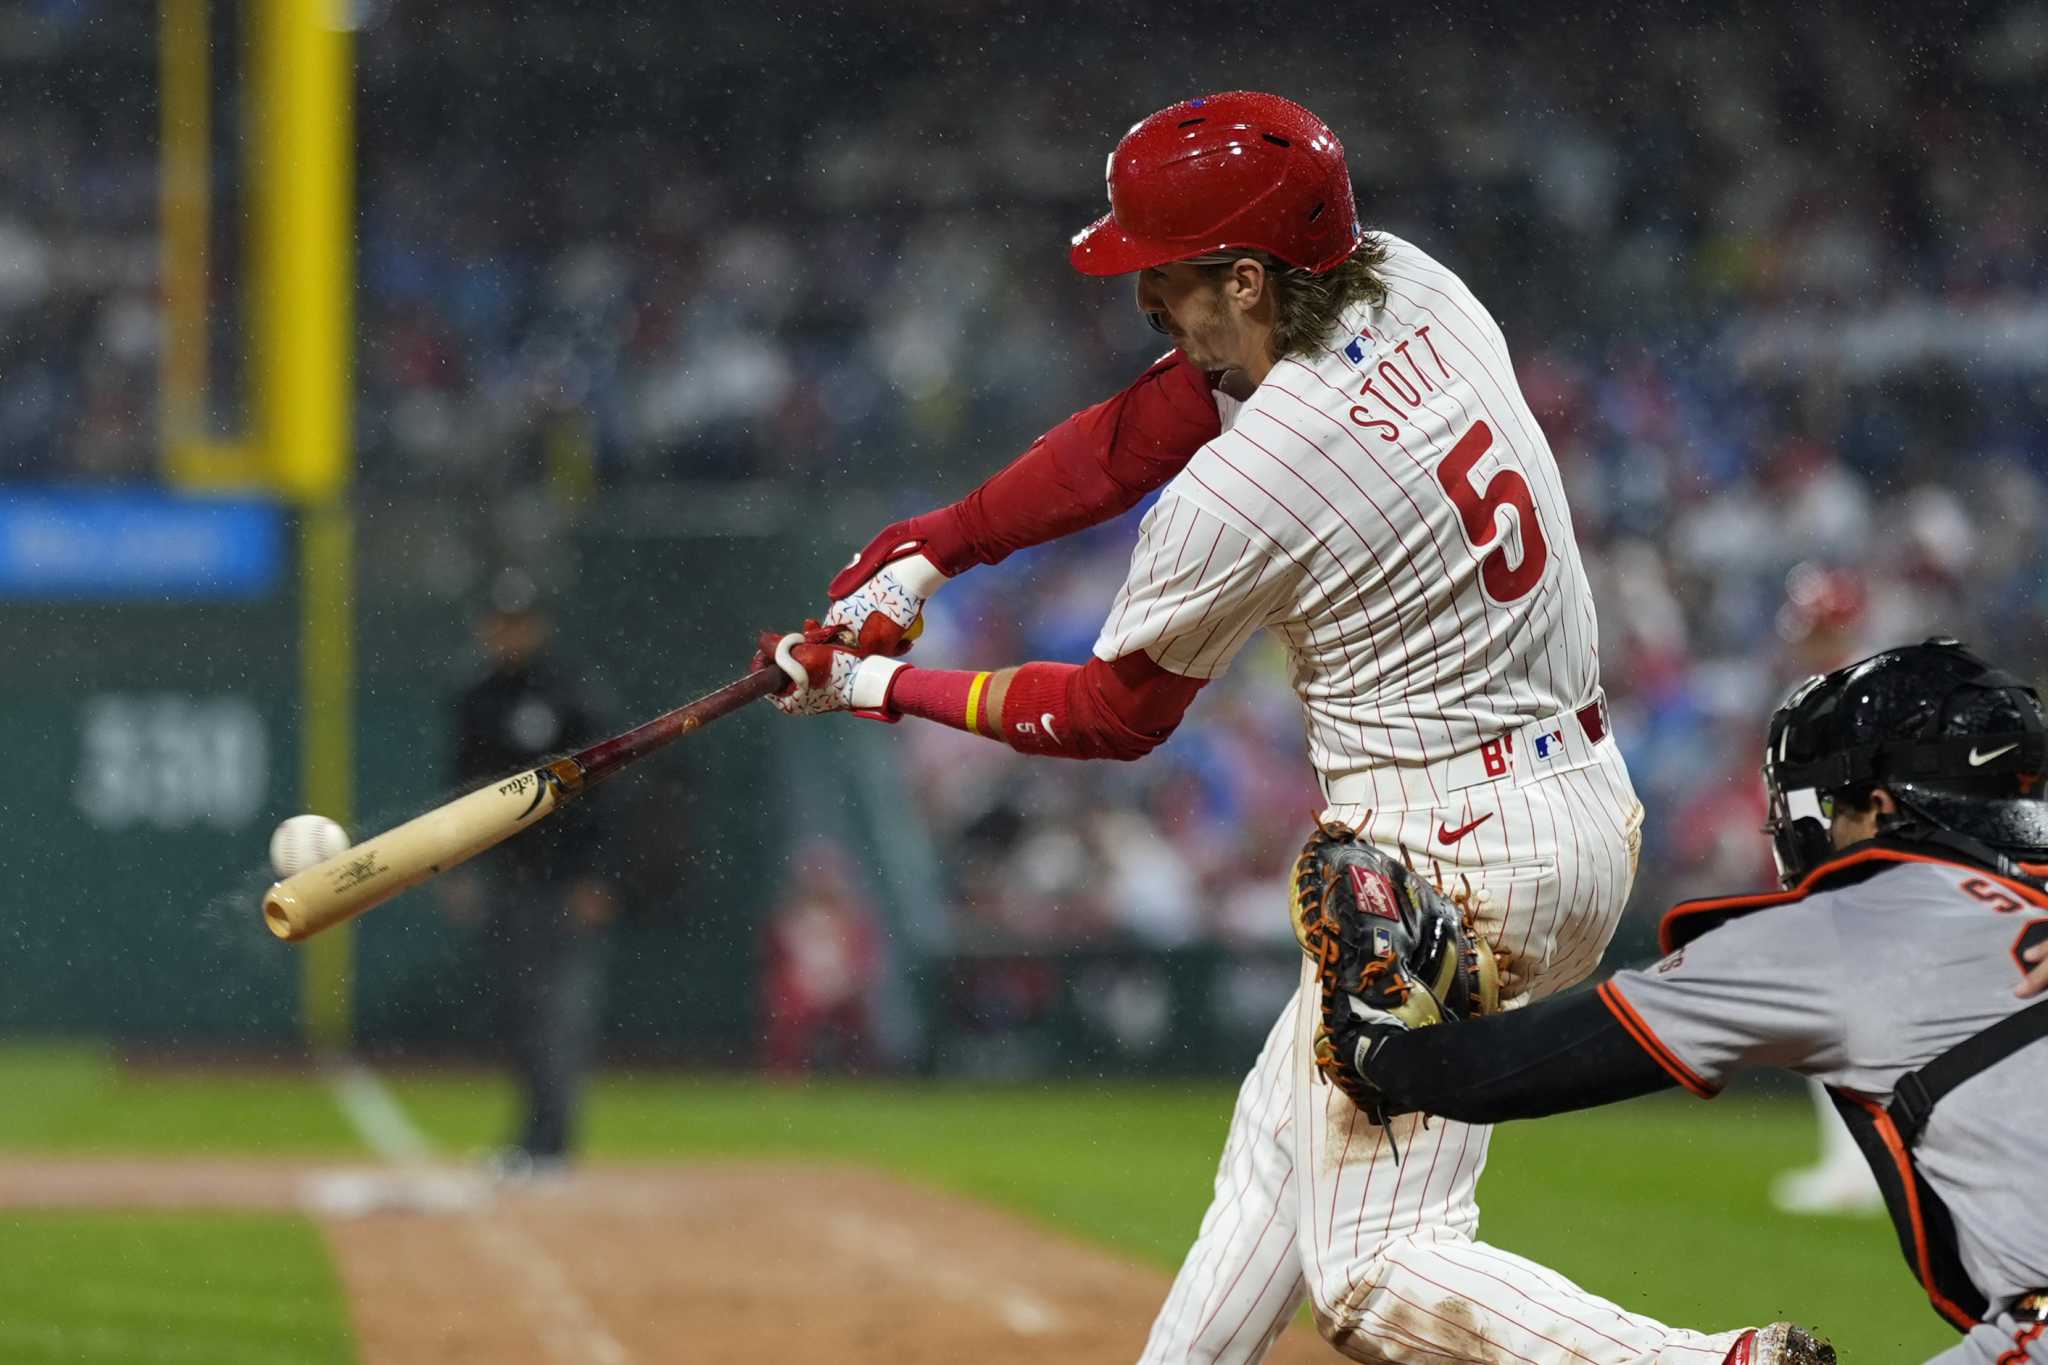 Suárez has strong 6-inning outing as the streaking Phillies rout the Giants 14-3